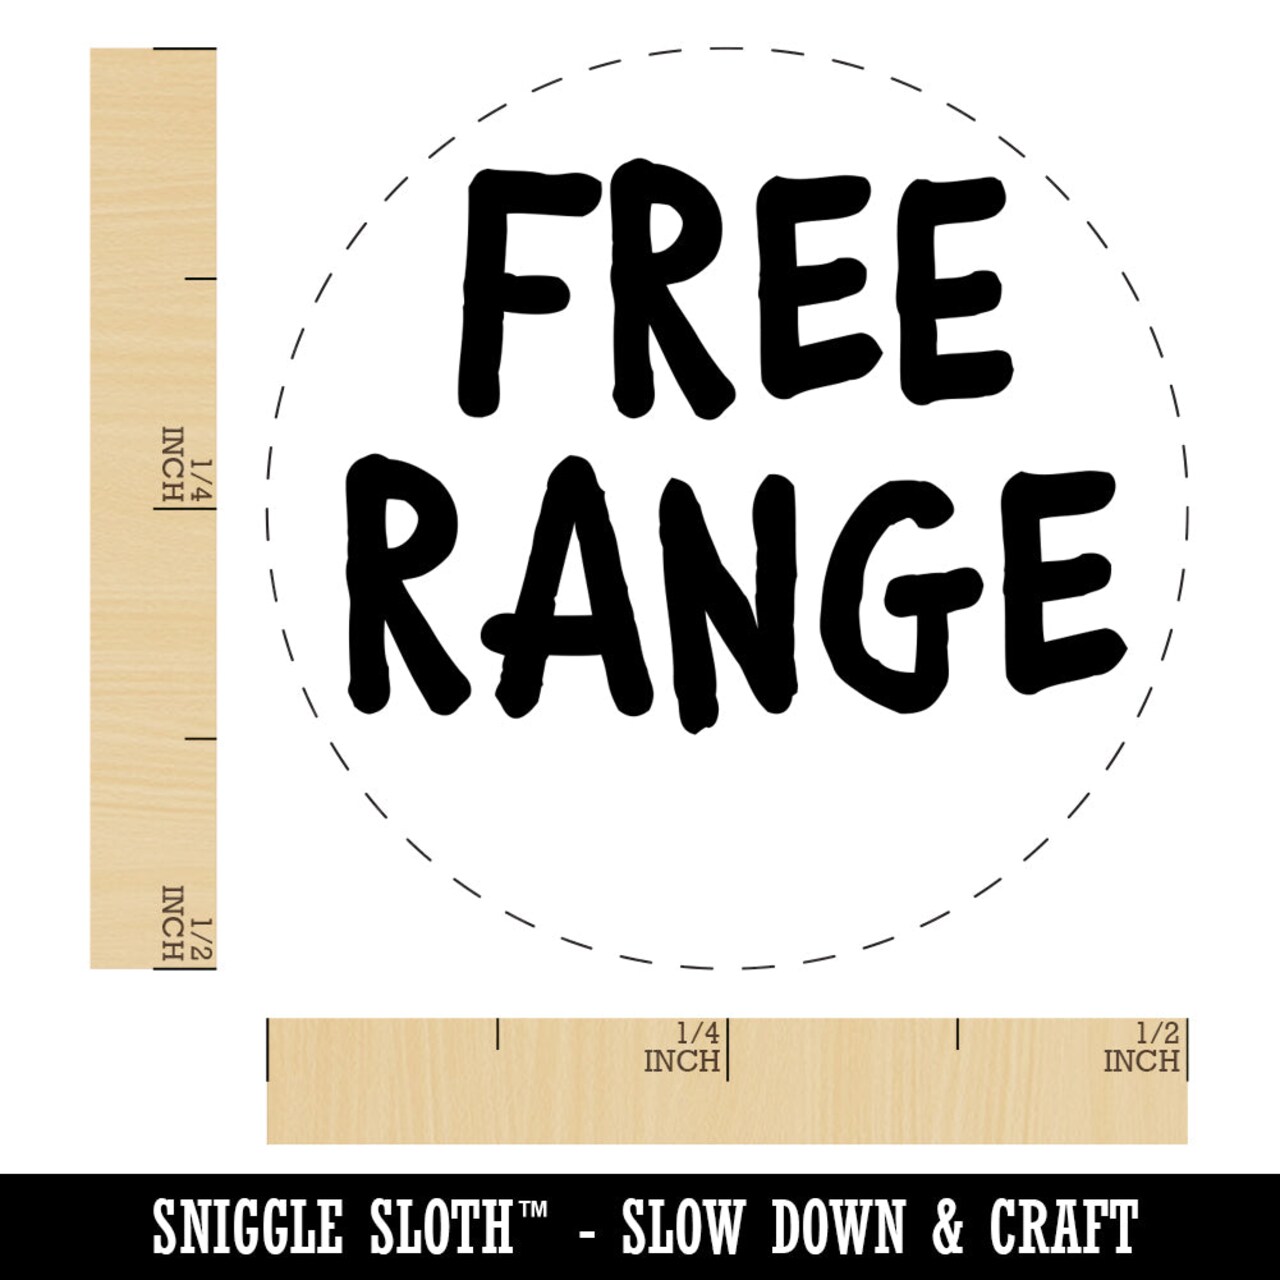 Free Range Chicken Egg Fun Text Self-Inking Rubber Stamp for Stamping Crafting Planners